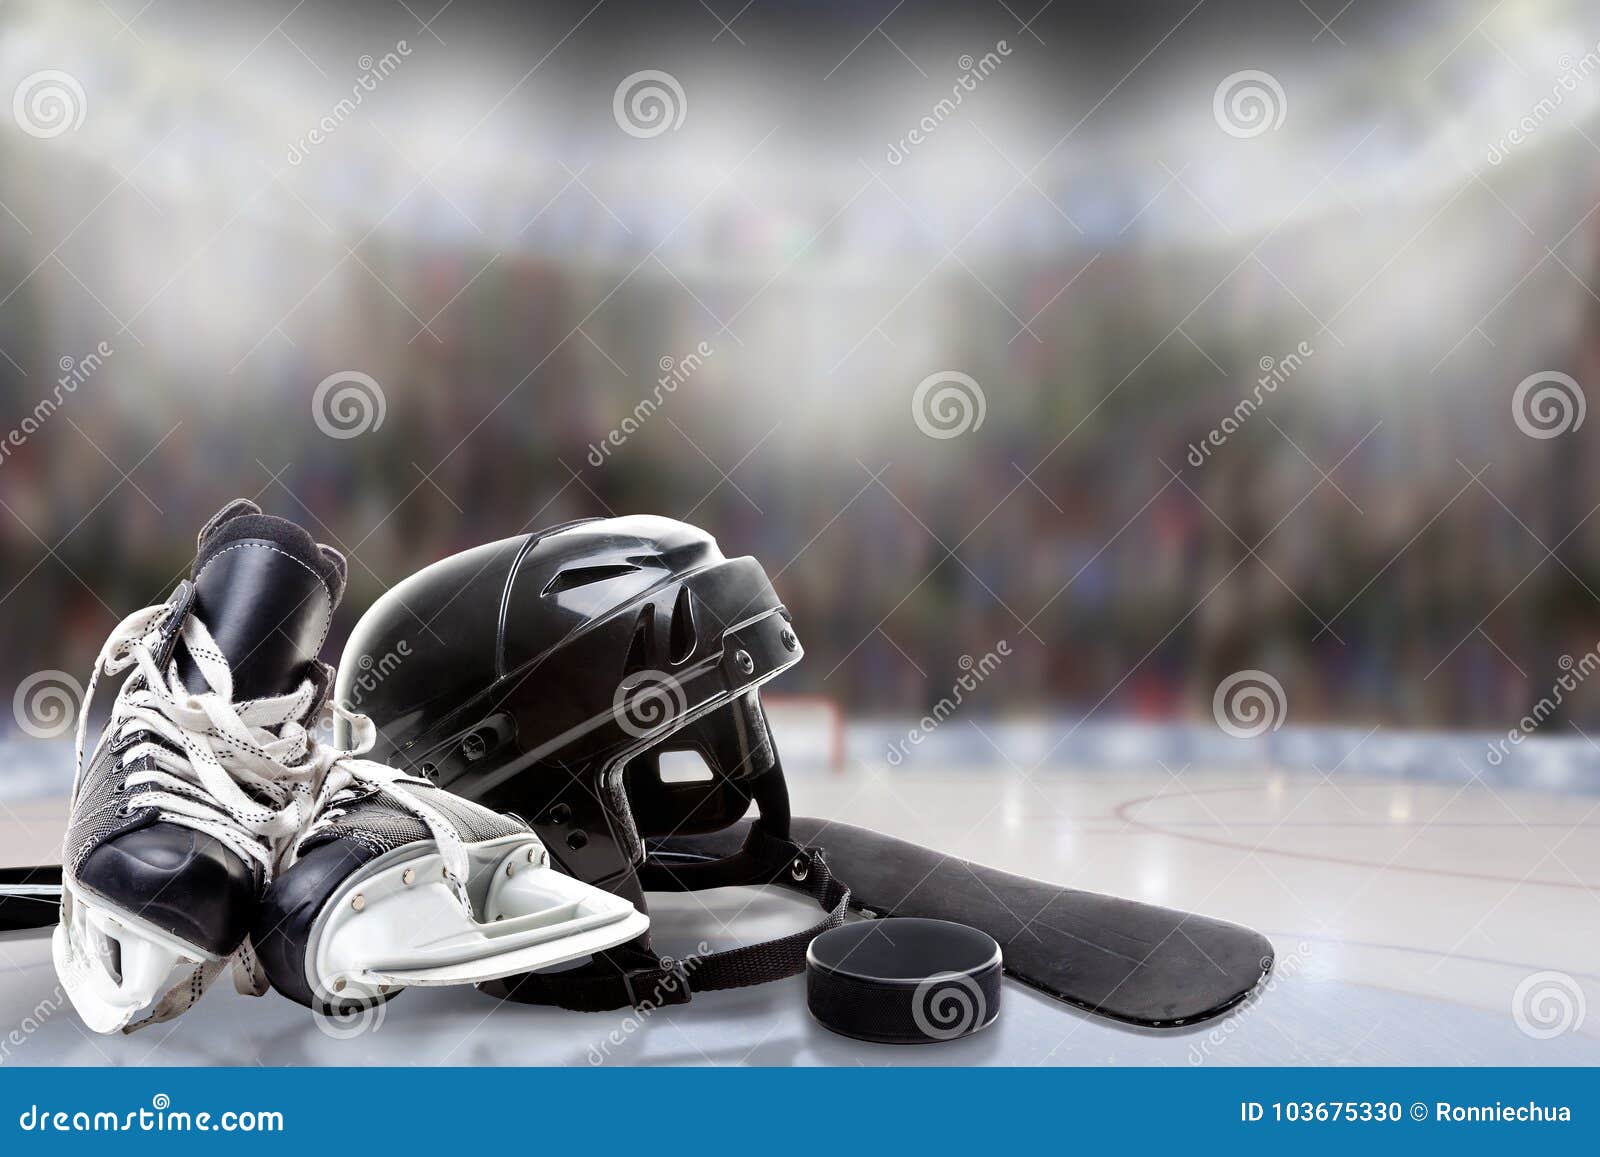 ice hockey helmet, skates, stick and puck in rink